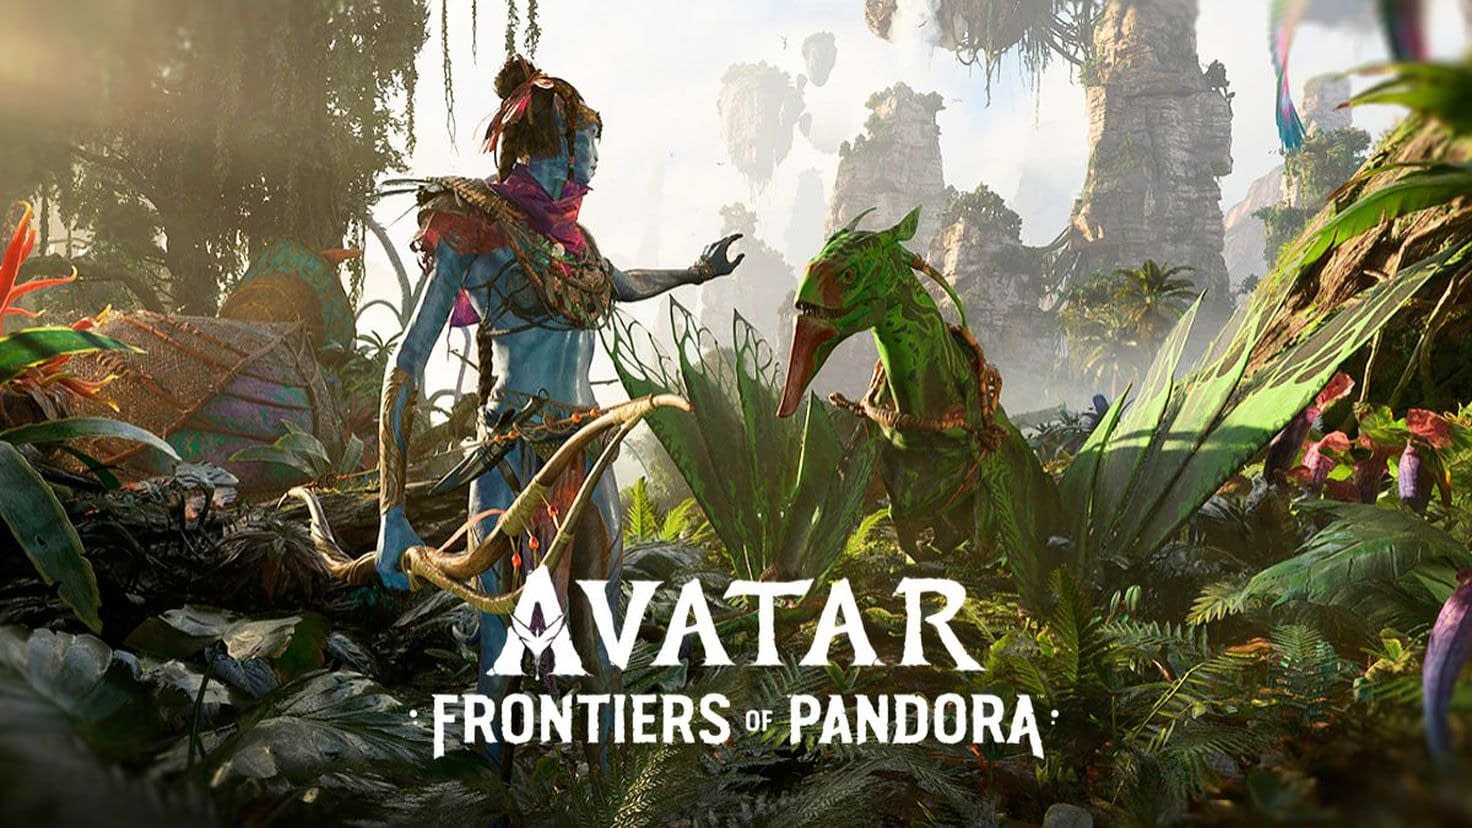 Avatar: The Story Fragman For Frontiers of Pandora Published